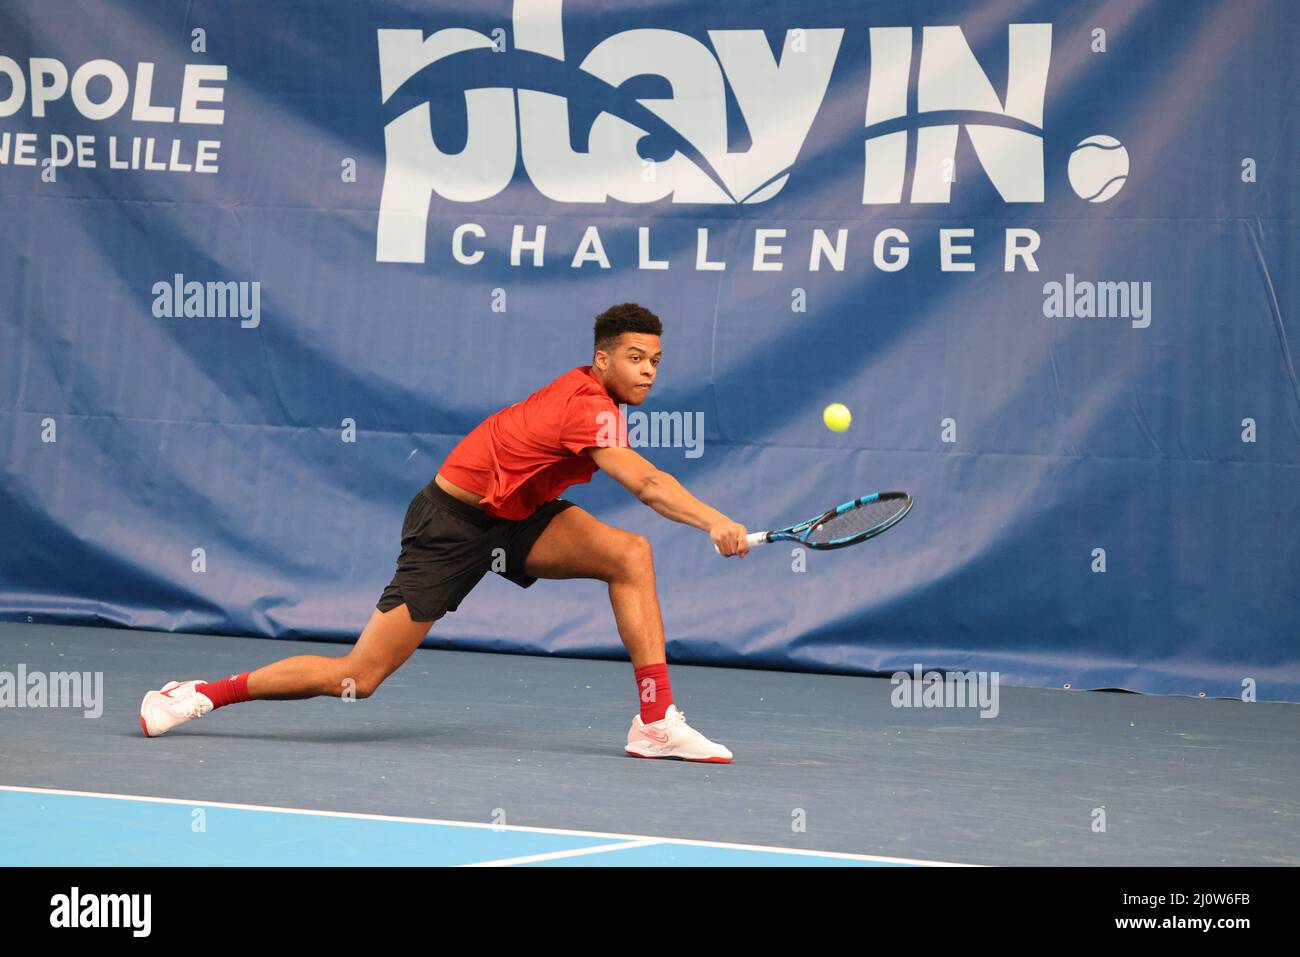 Giovanni Mpetshi Perricard during the Play In Challenger 2022, ATP  Challenger Tour tennis tournament on March